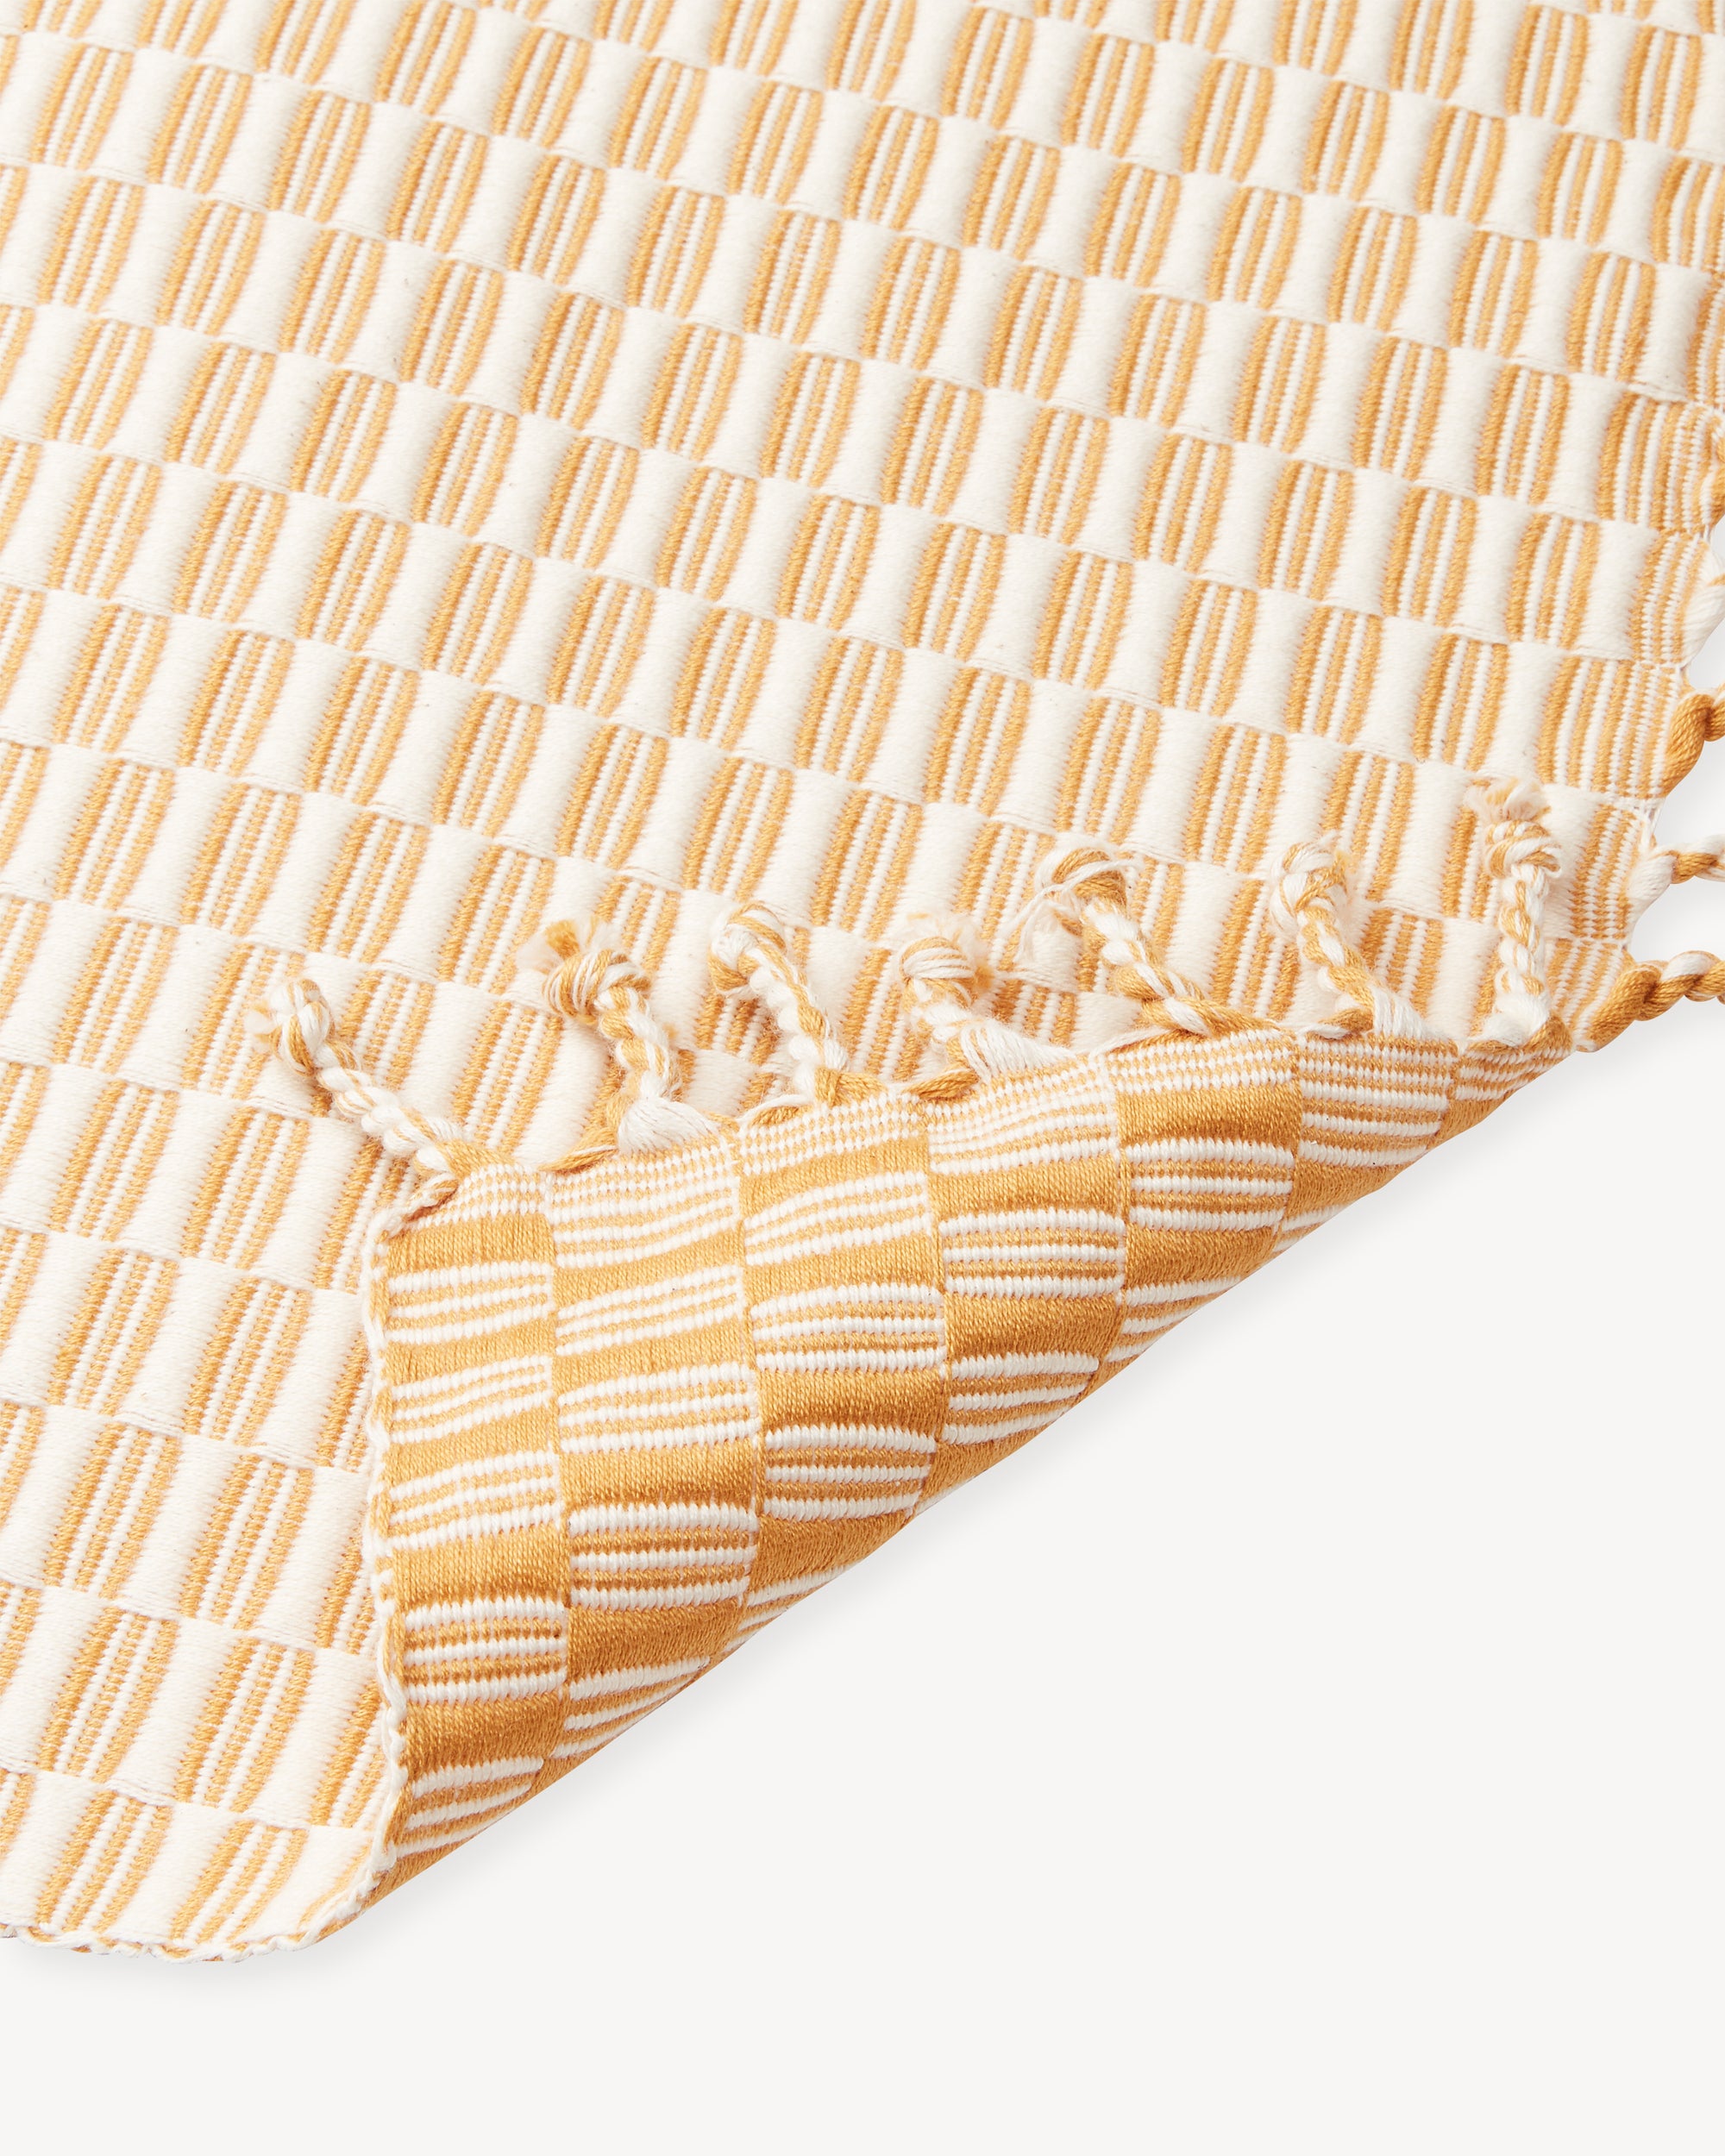 close-up detail ethically handwoven MINNA Panalito gold yellow placemat